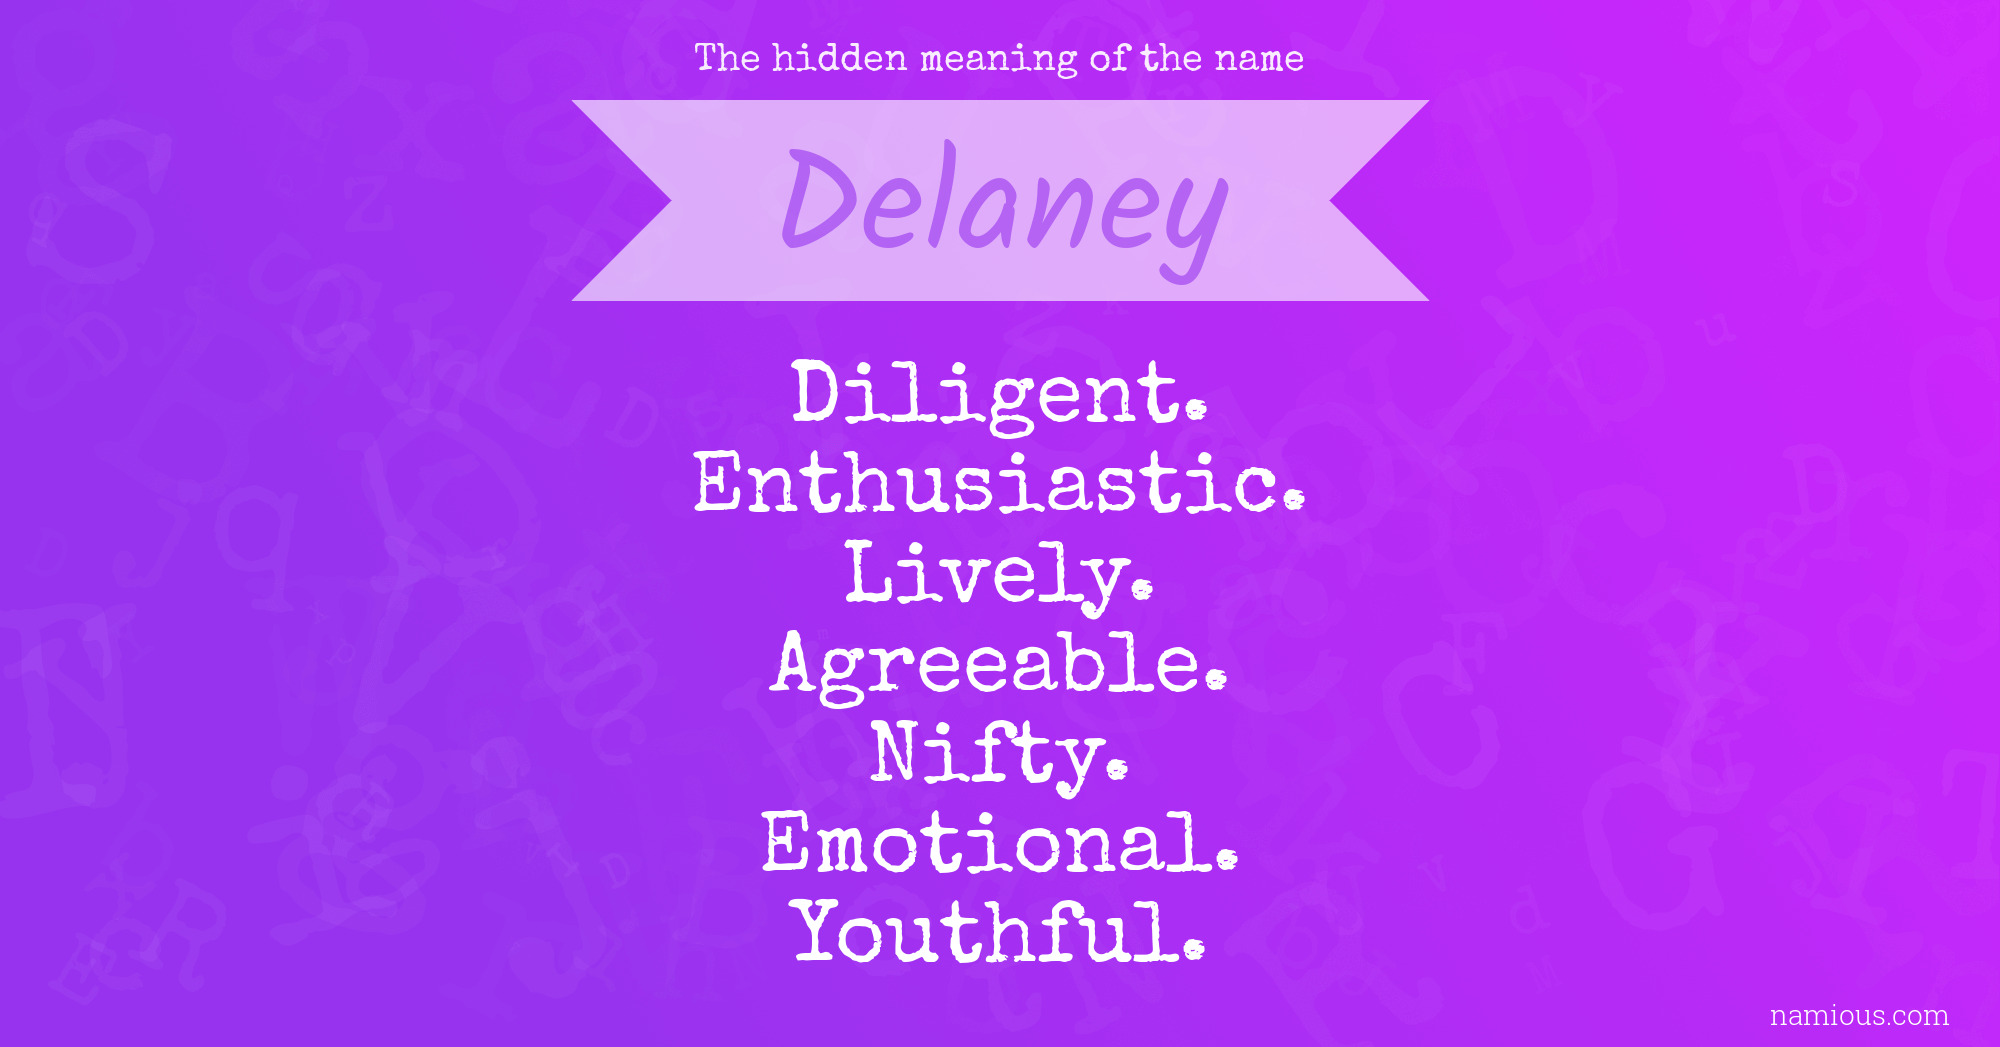 The hidden meaning of the name Delaney